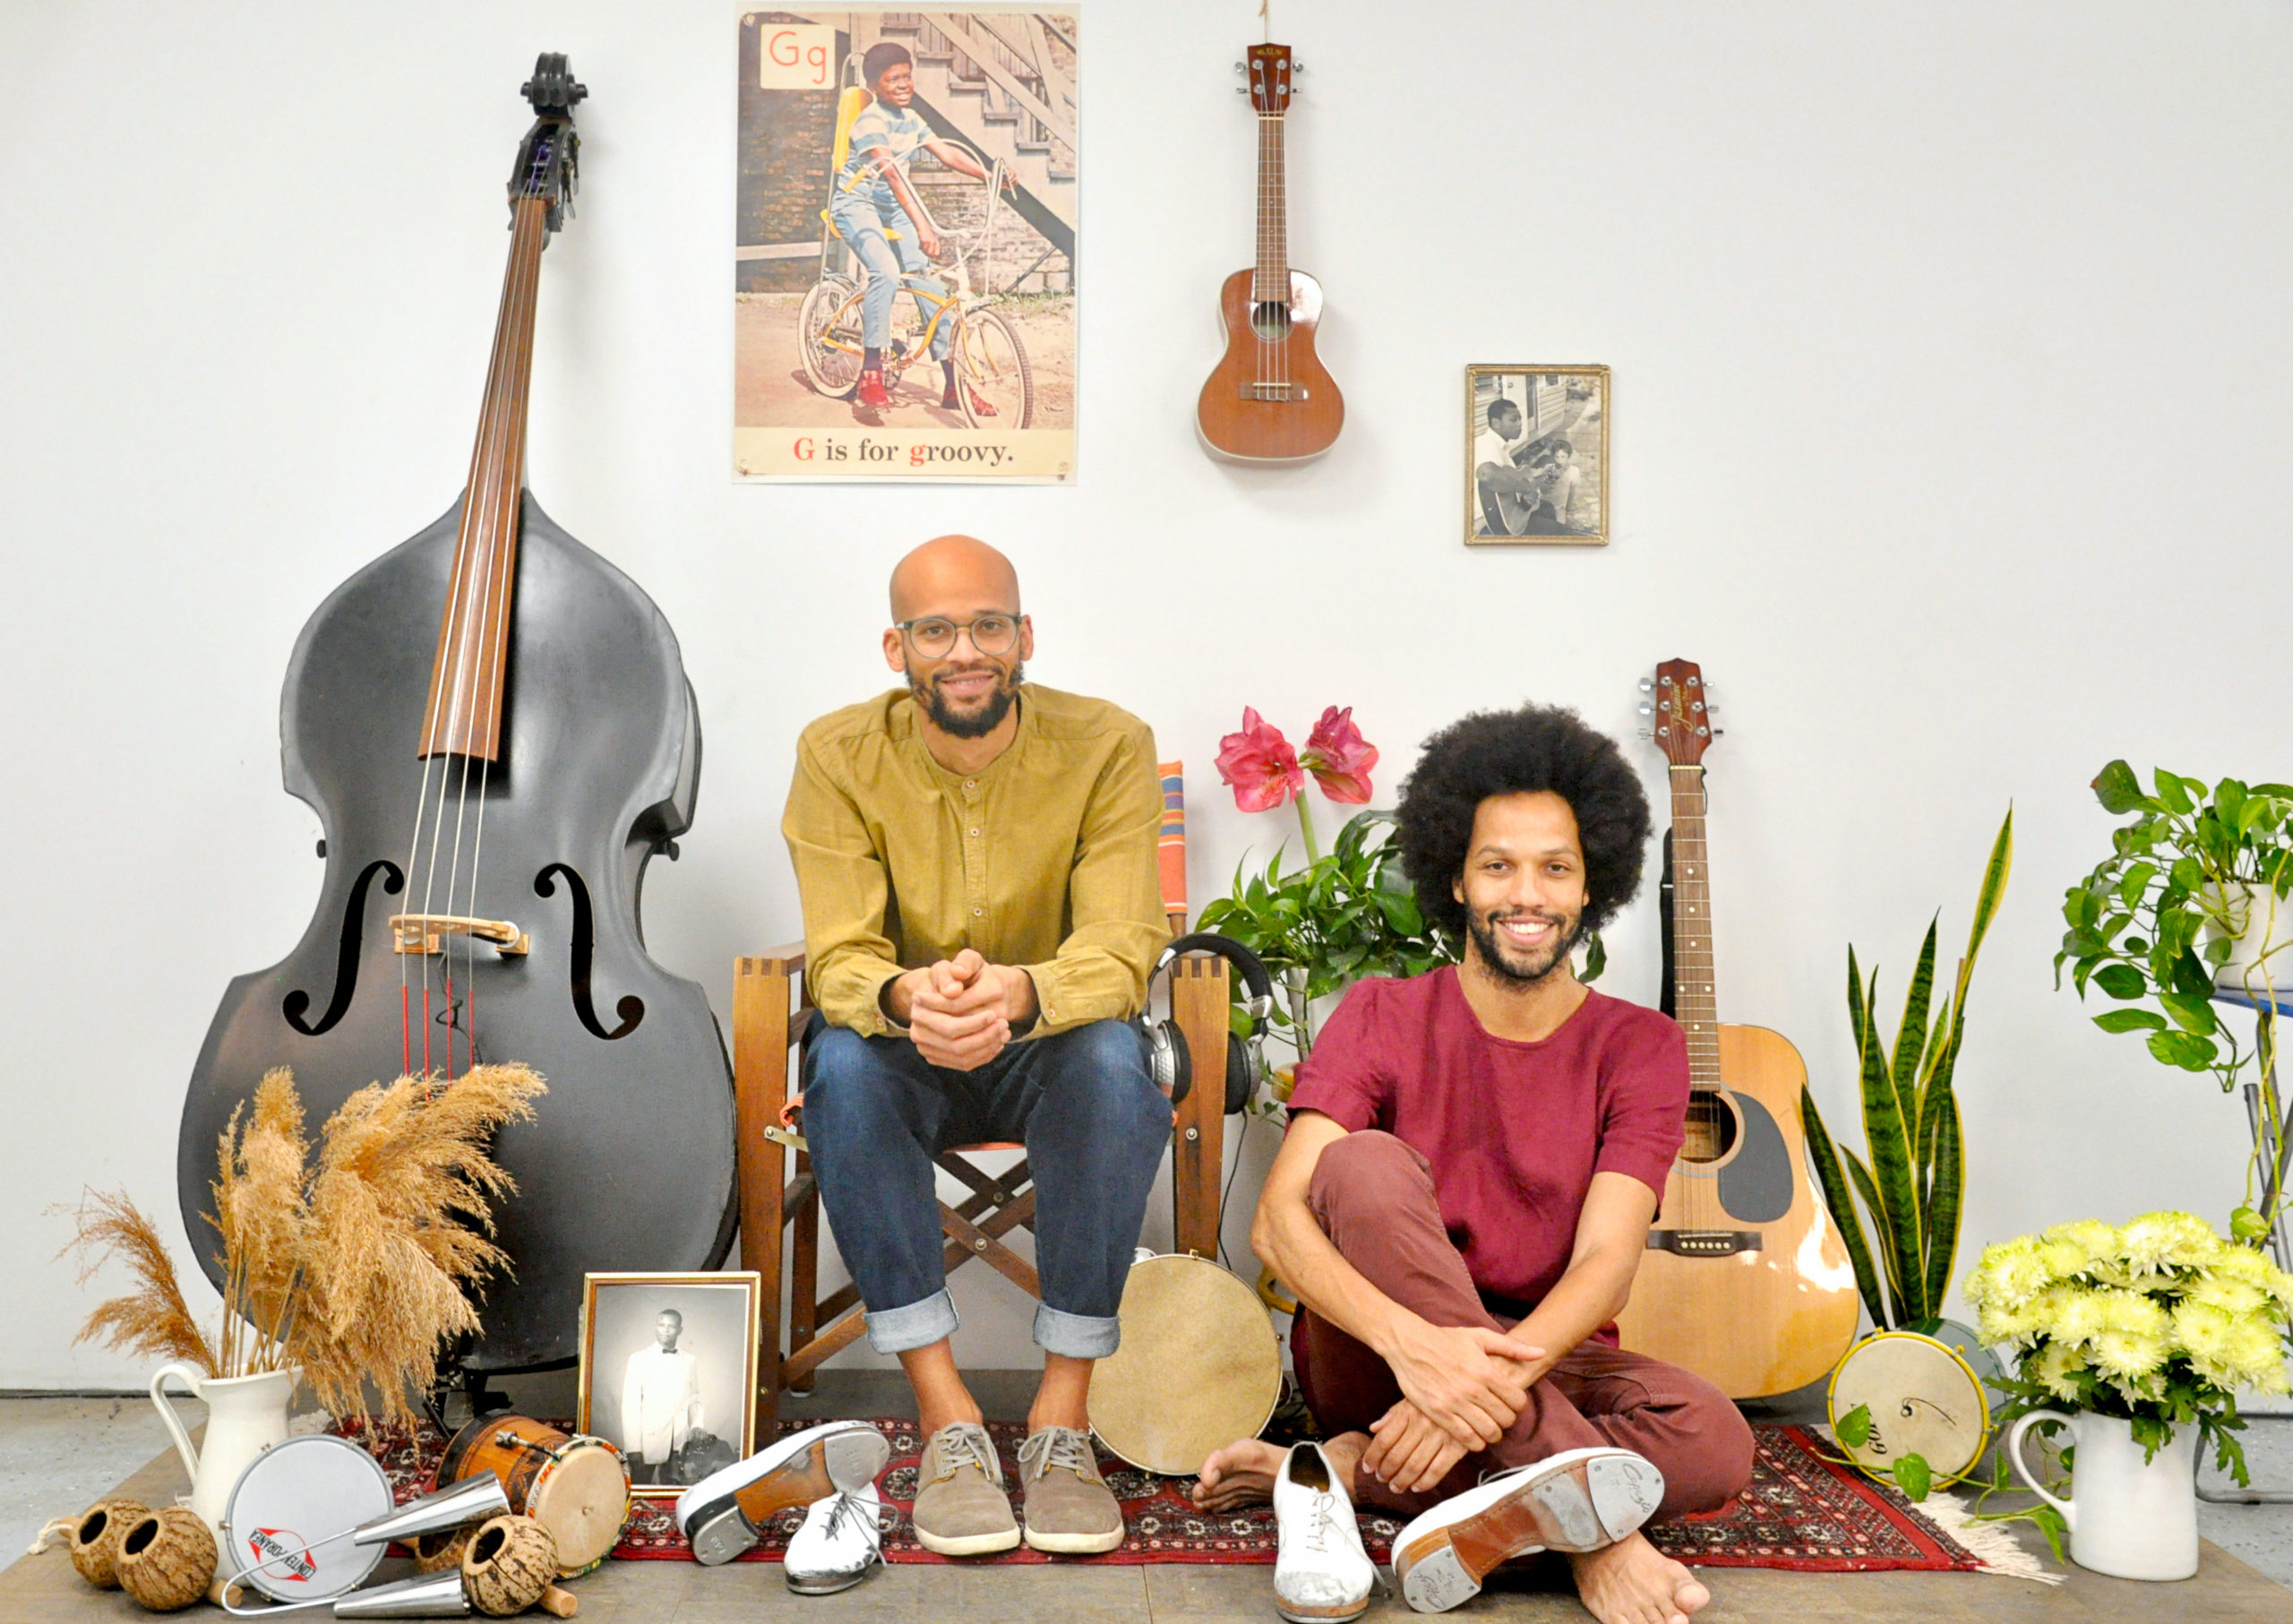 Gregory Richardson is a light-skinned Black man who is bald and has a beard and glasses. Leonardo Sandoval is a man with a medium complexion, curly hair and a beard. They sit on a carpet surround by musical instruments.